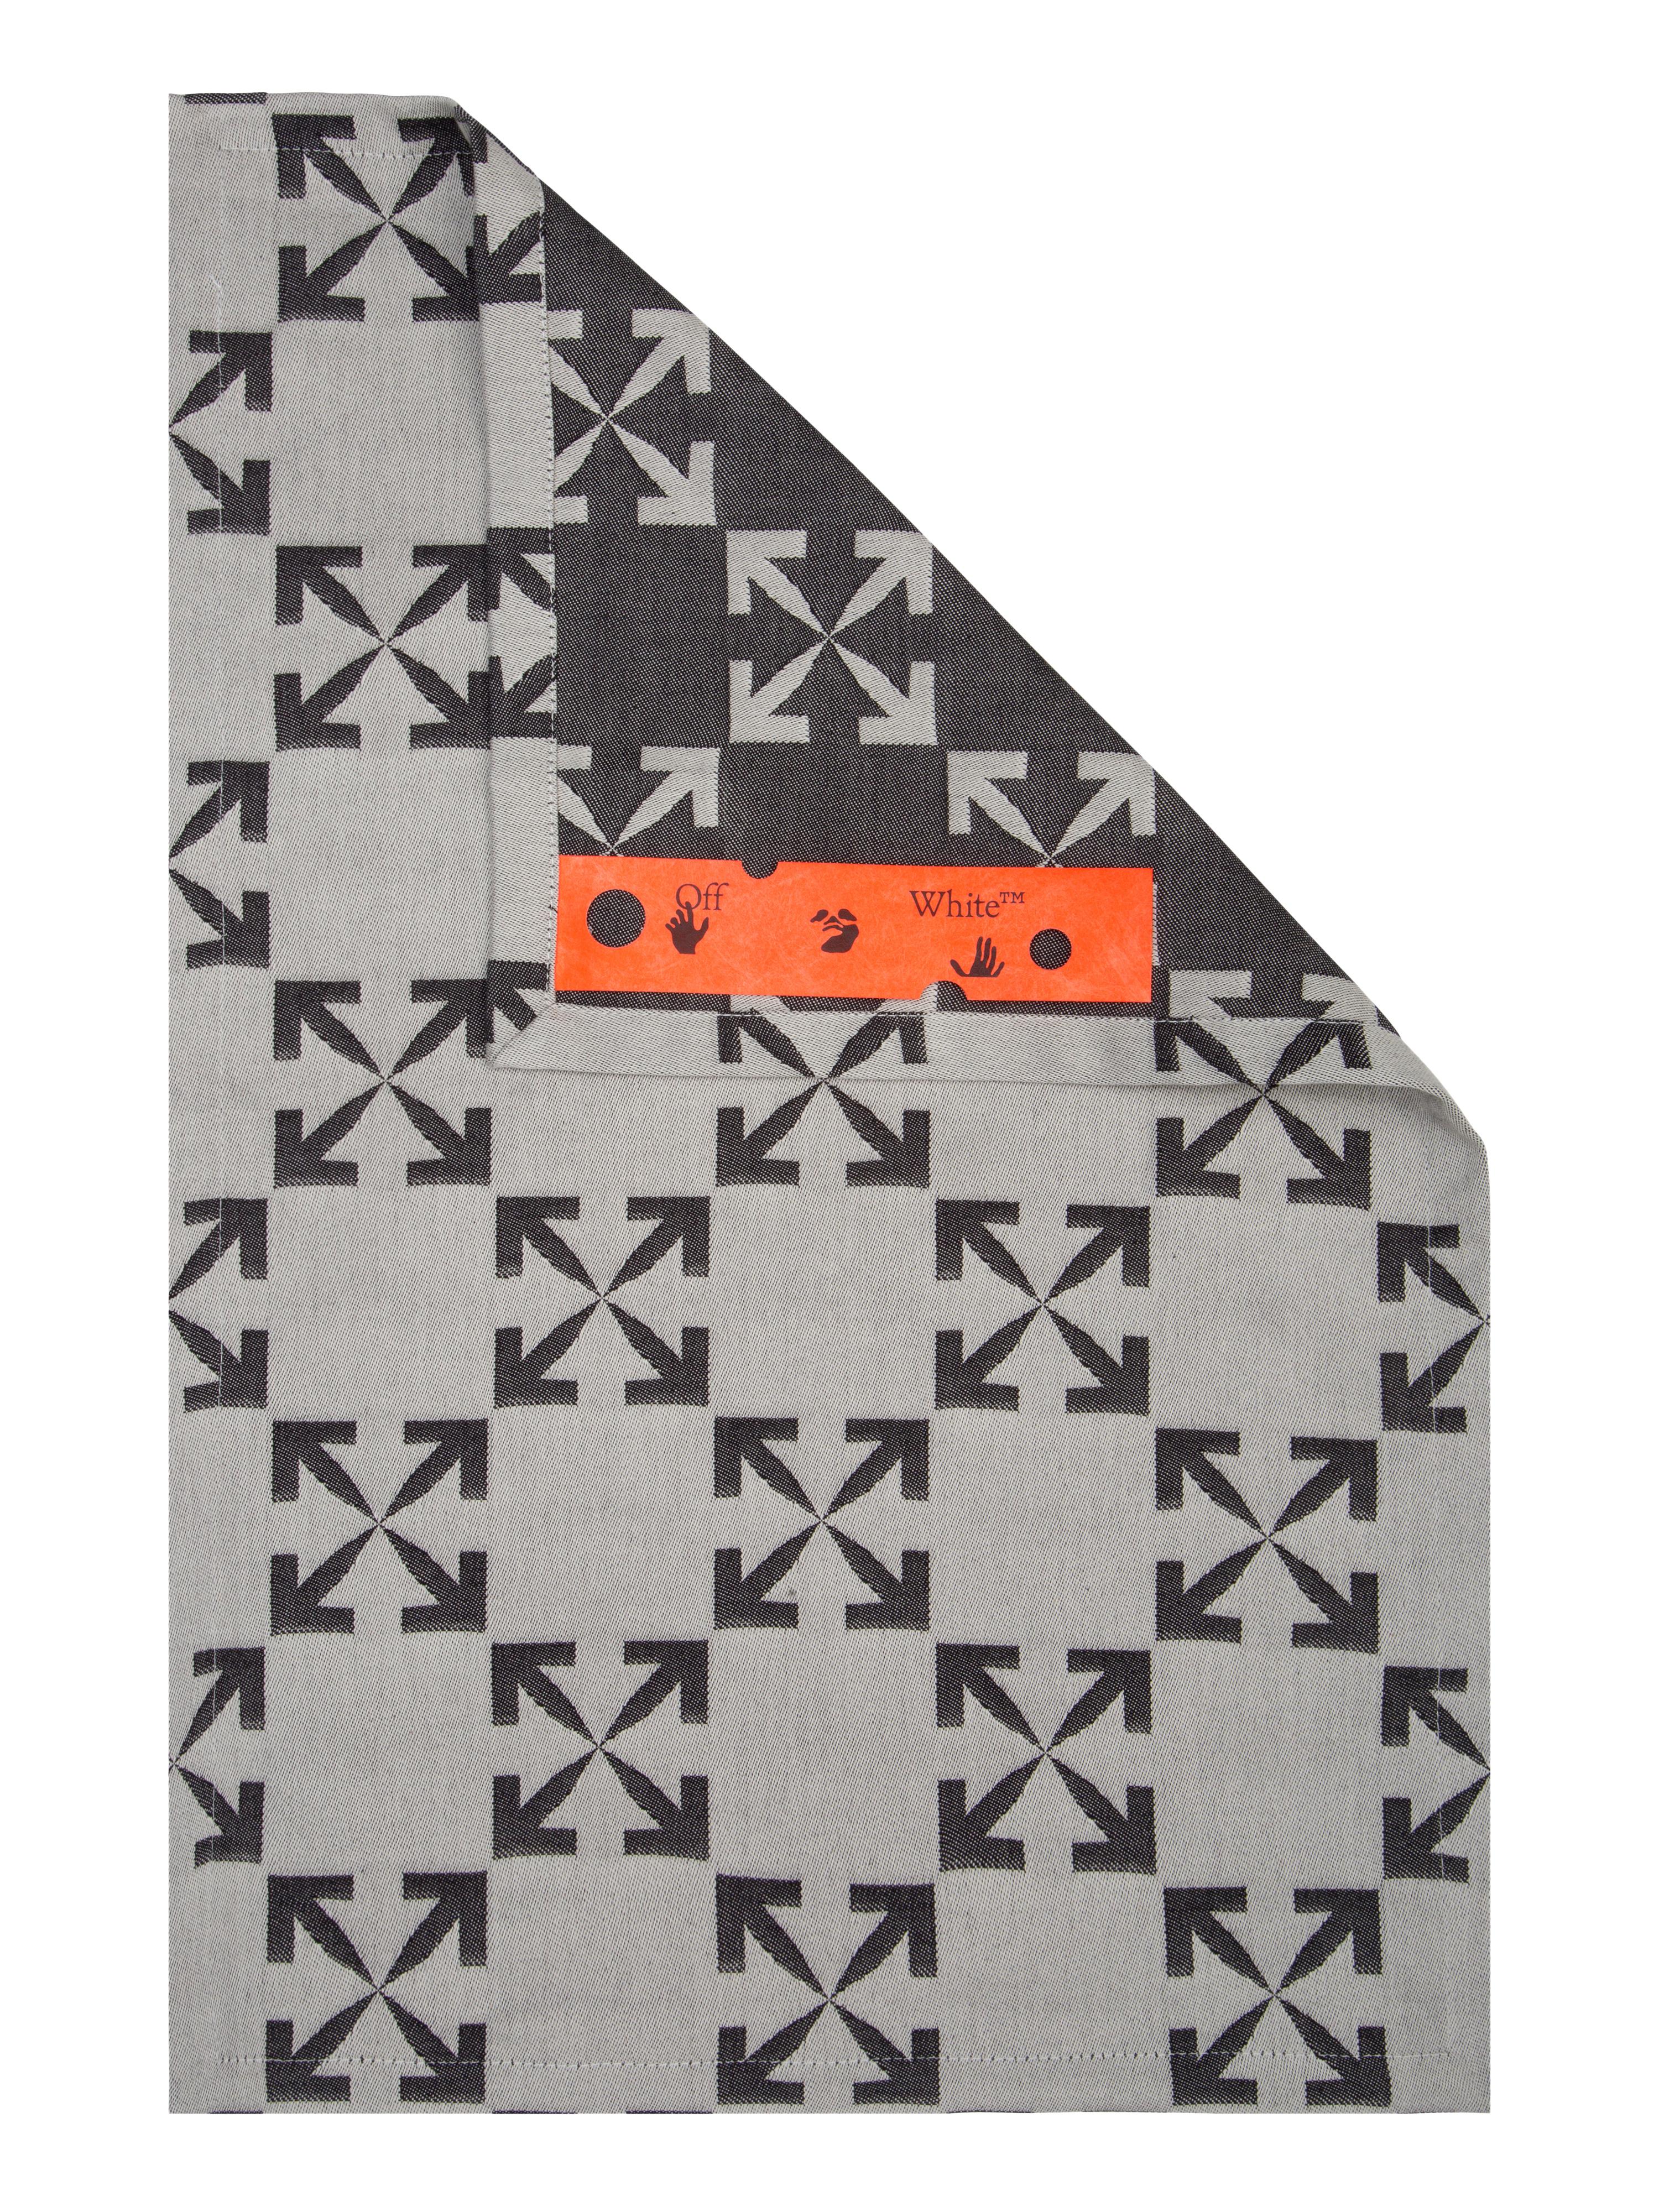 Kitchen textiles in Taupe and Black colors, with Arrow pattern in jacquard. Set of 4. Each mat has a HOME Orange Tyvec label on a side 

set of 4
By Virgil Abloh
Dimensions: 35 W x 50 H
This item is only available to be purchased and shipped to